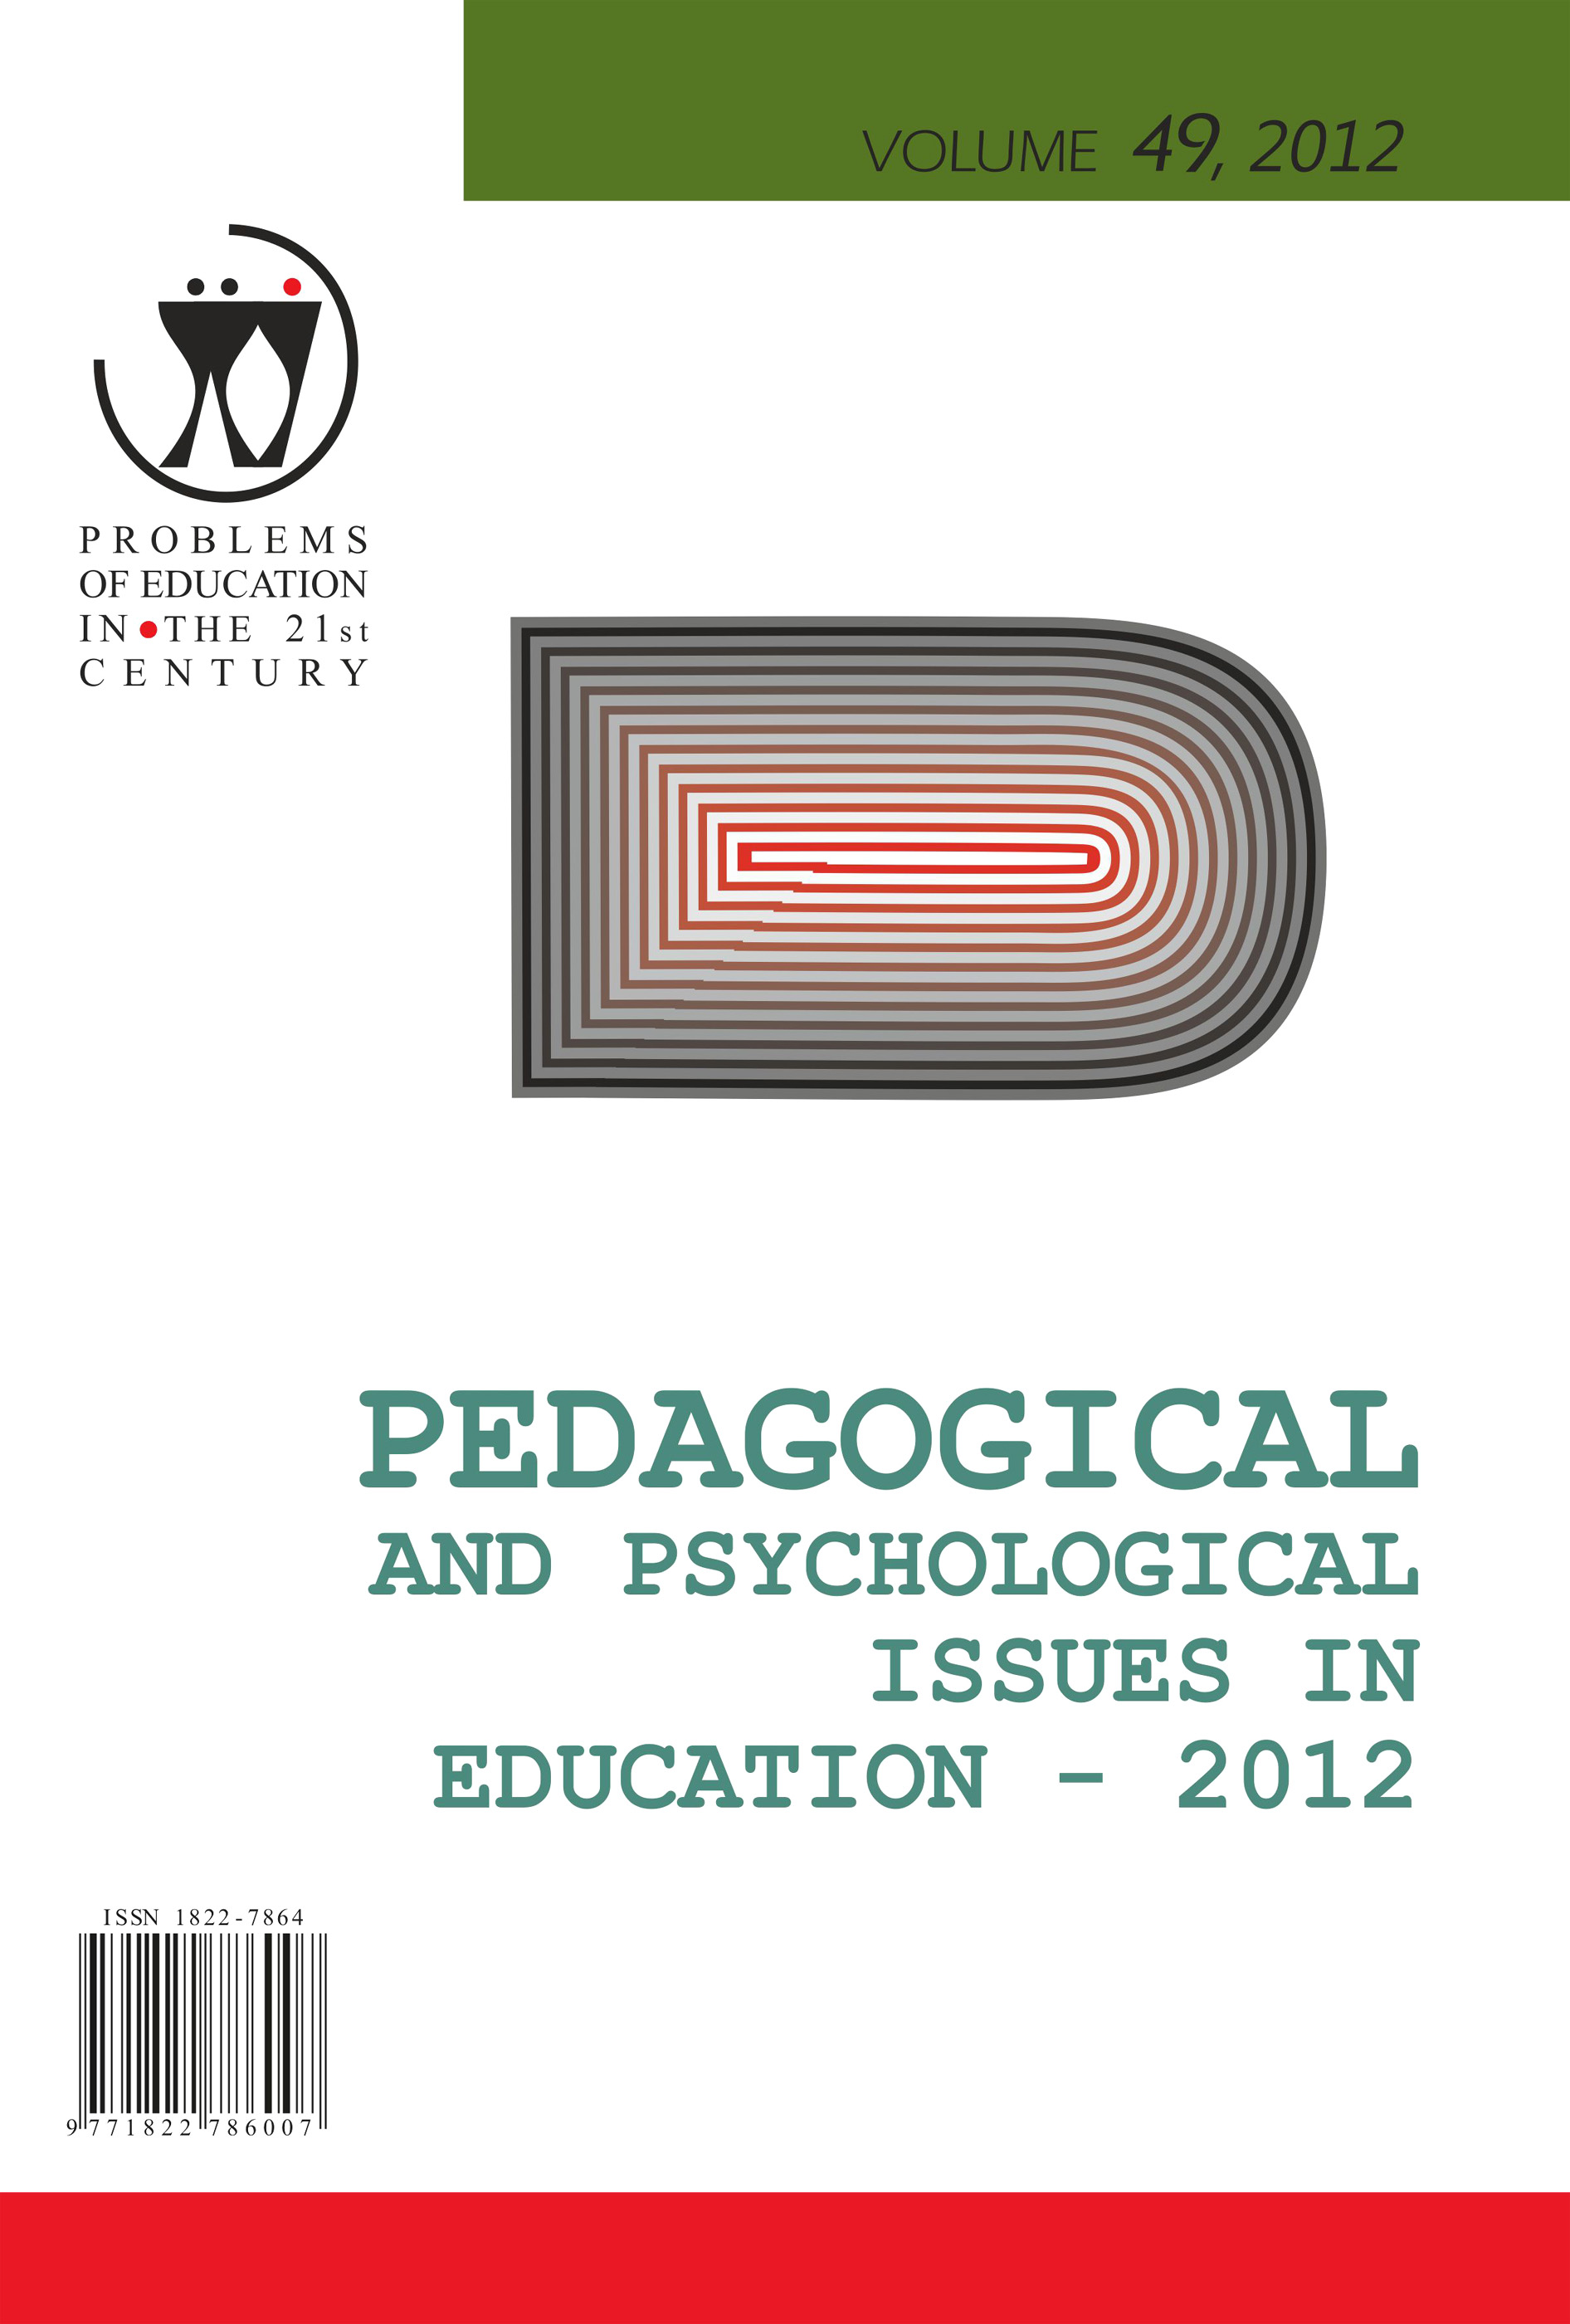 PSYCHOLOGICAL WELL-BEING AND ITS RELATION TO ACADEMIC PERFORMANCE OF STUDENTS IN GEORGIAN CONTEXT Cover Image